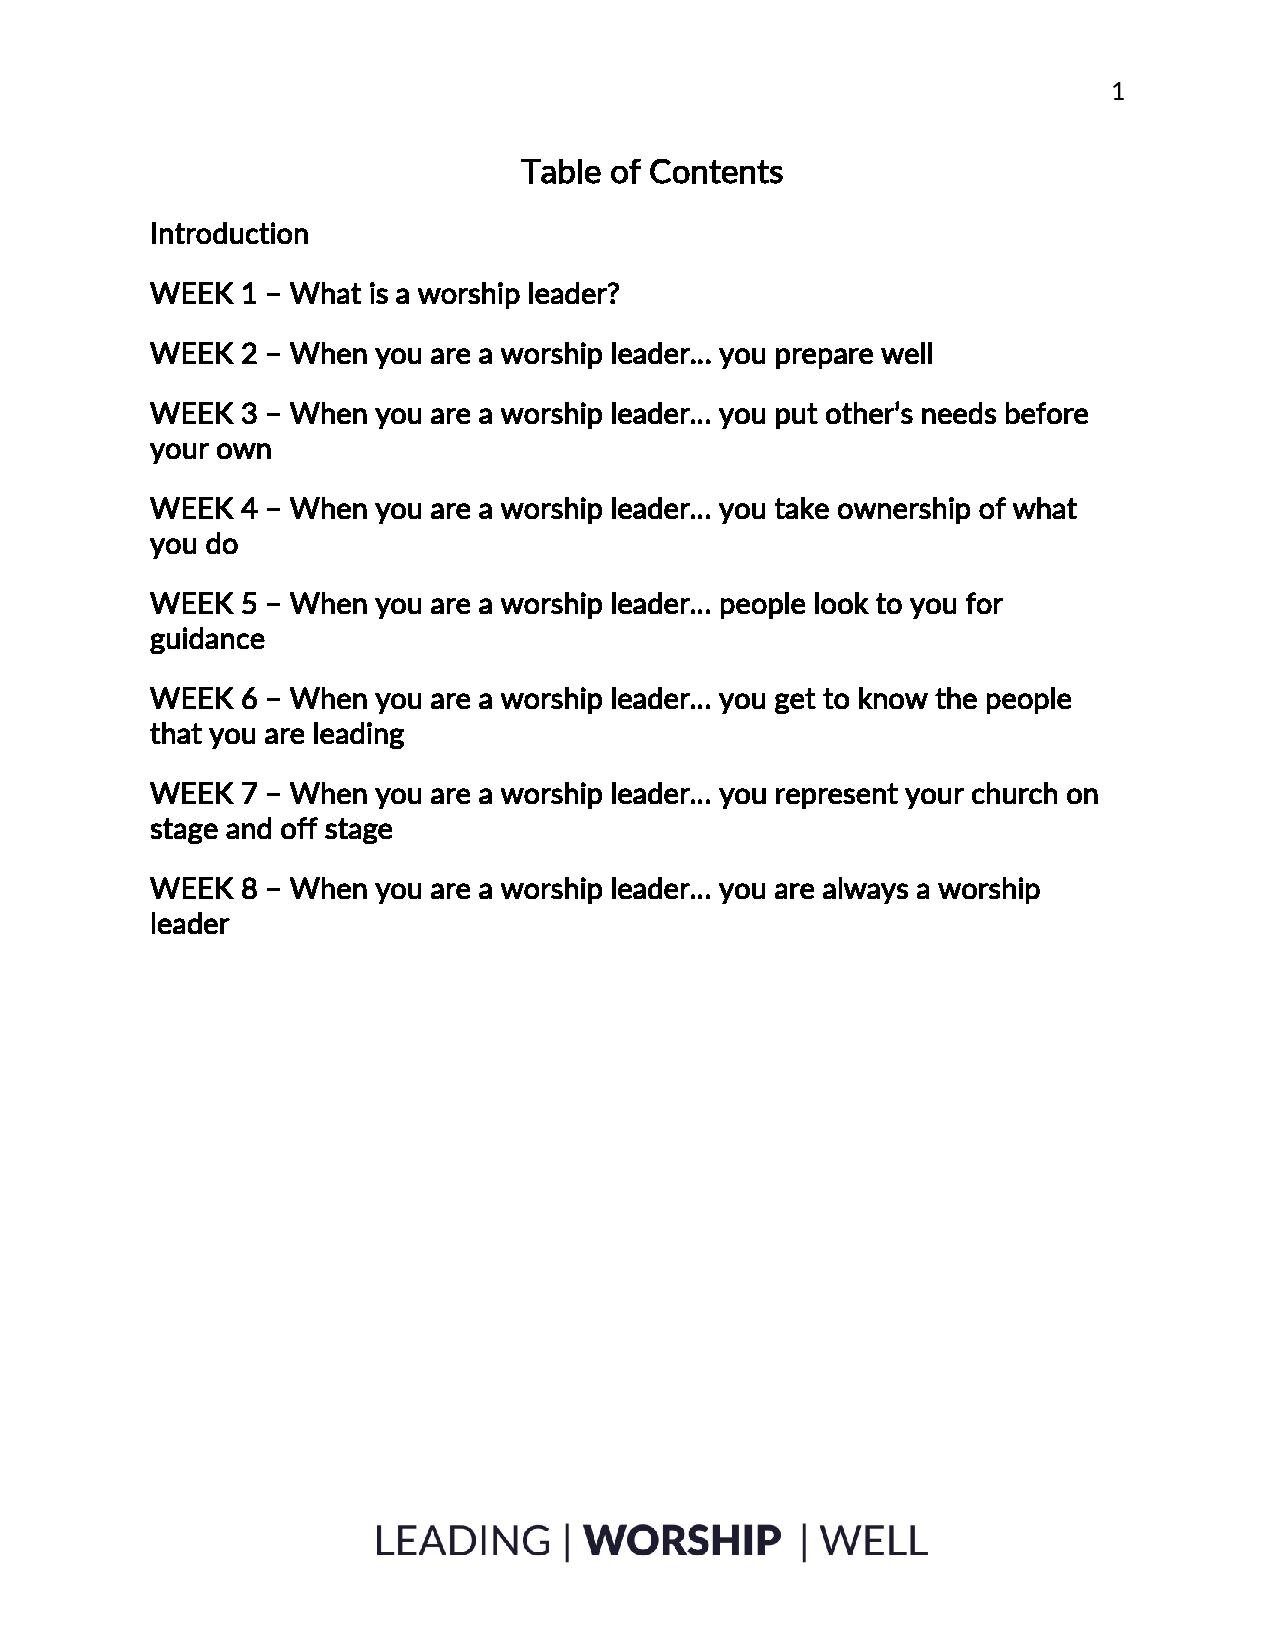 We Are All Worship Leaders - An 8 Week Devotional For Worship Teams-page-002.jpg